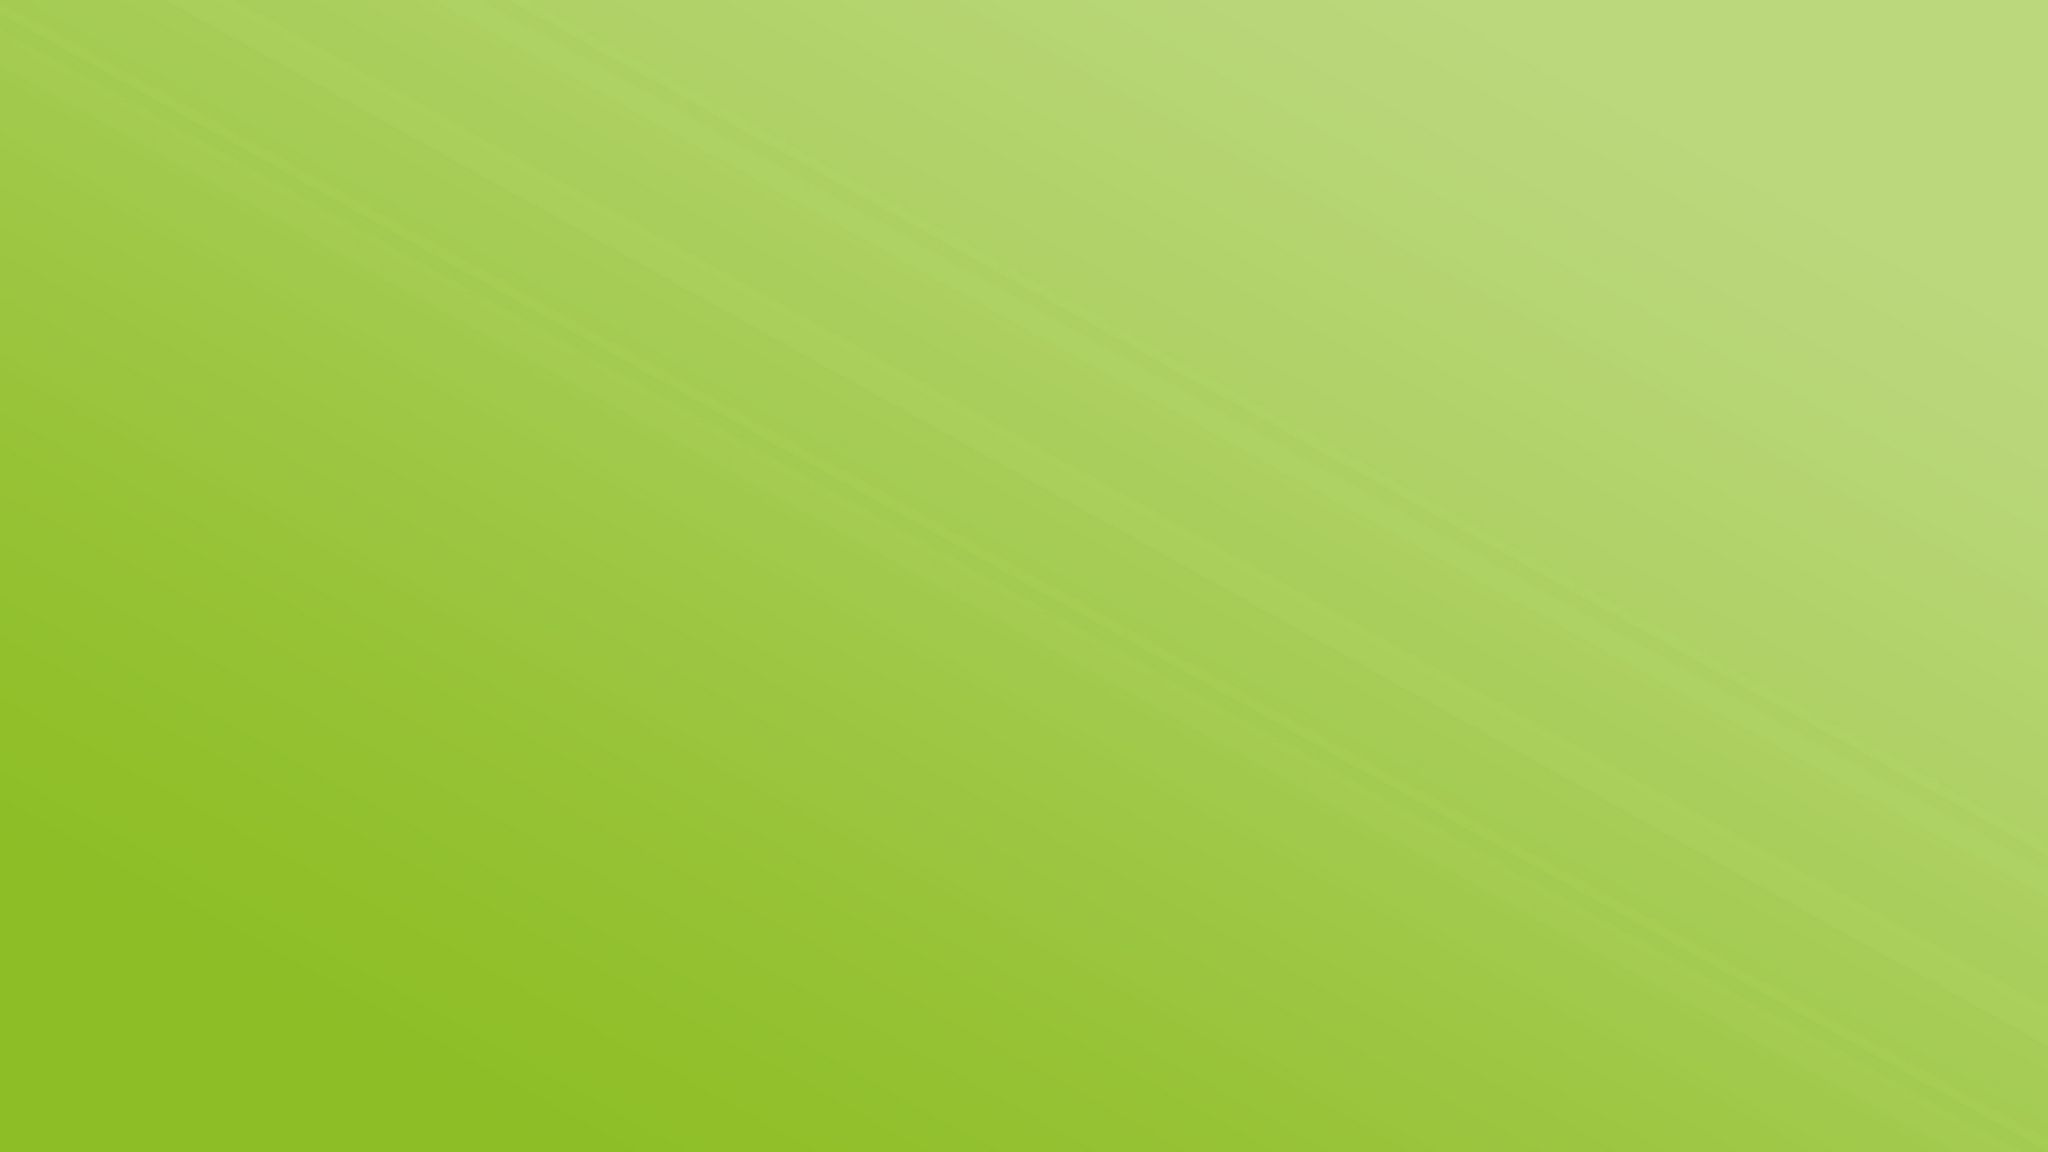 Download wallpaper 2048x1152 light green, solid, color ultrawide monitor hd  background